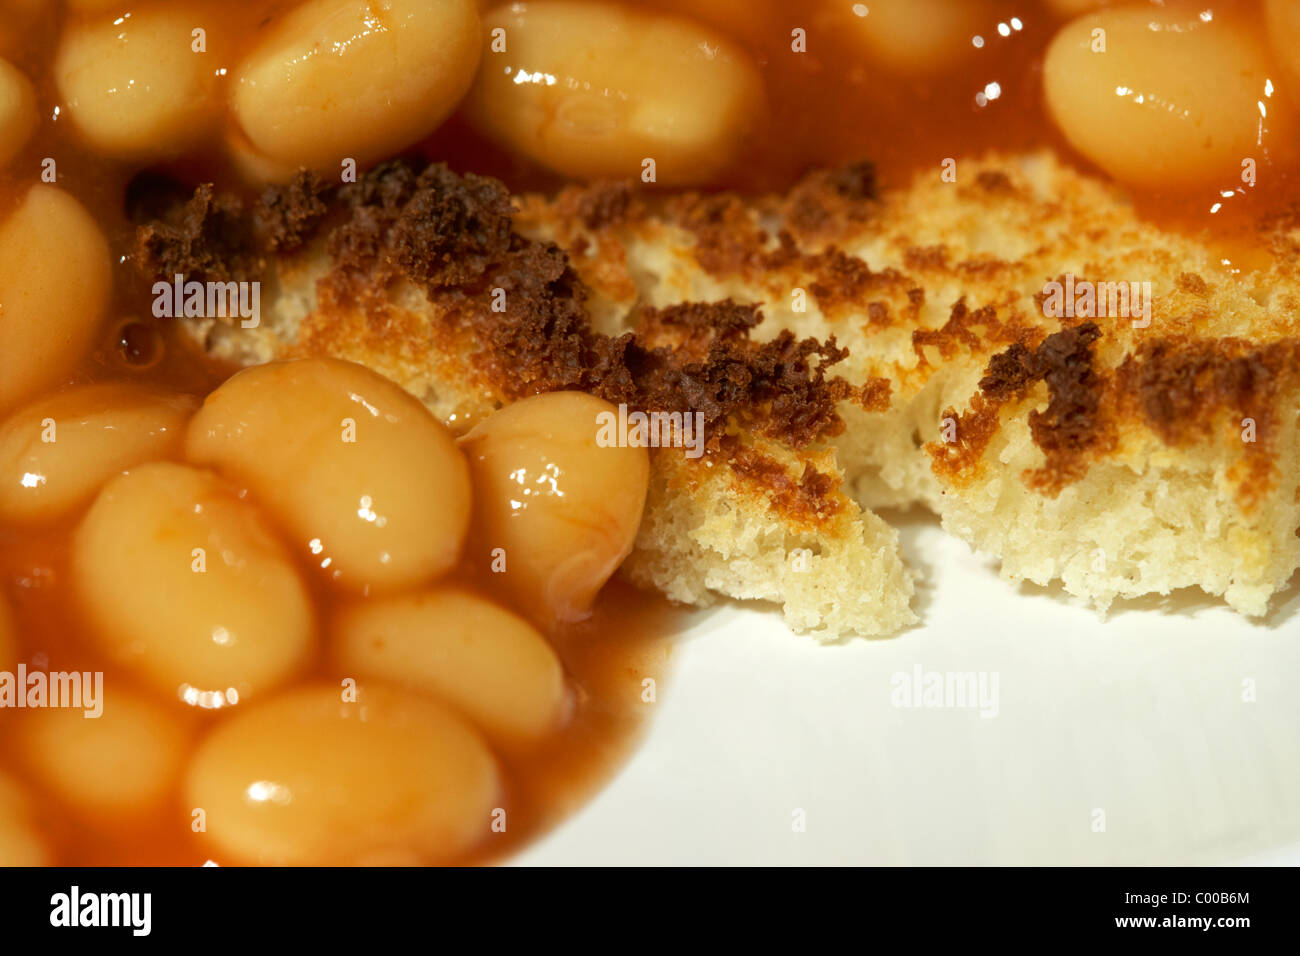 baked beans on toast a traditional british meal Stock Photo